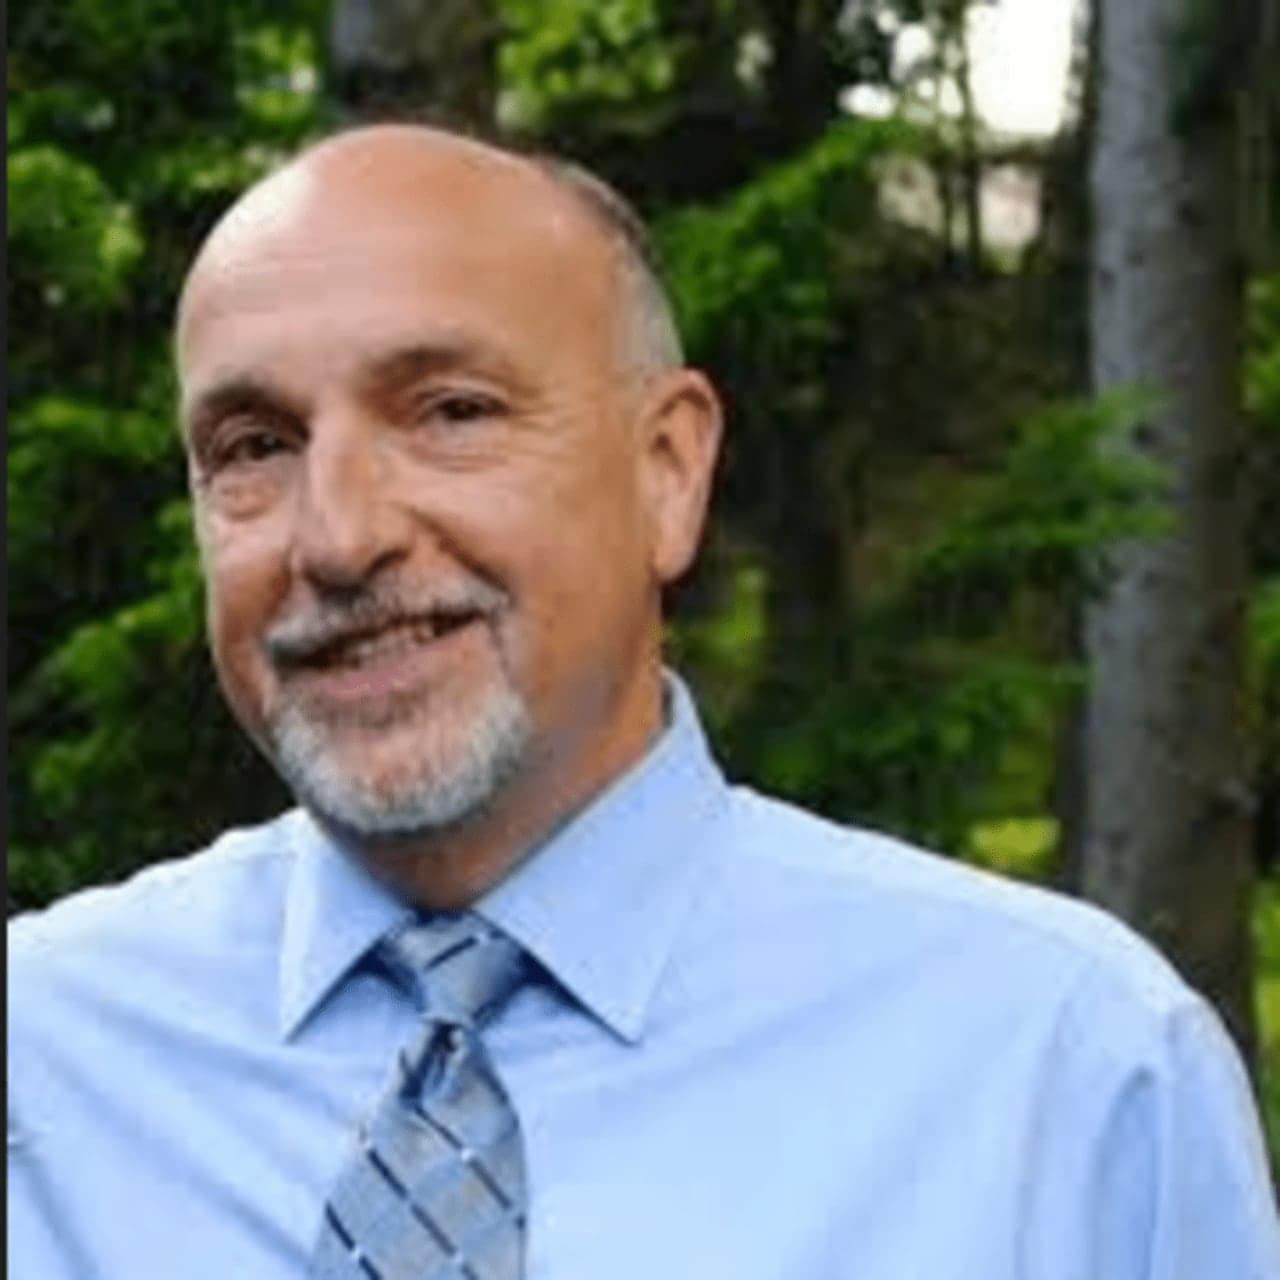 Hastings-on-Hudson Superintendent Roy Montesano is taking his 37 years of experience to Bronxville. There will be a welcome reception for him on Wednesday.